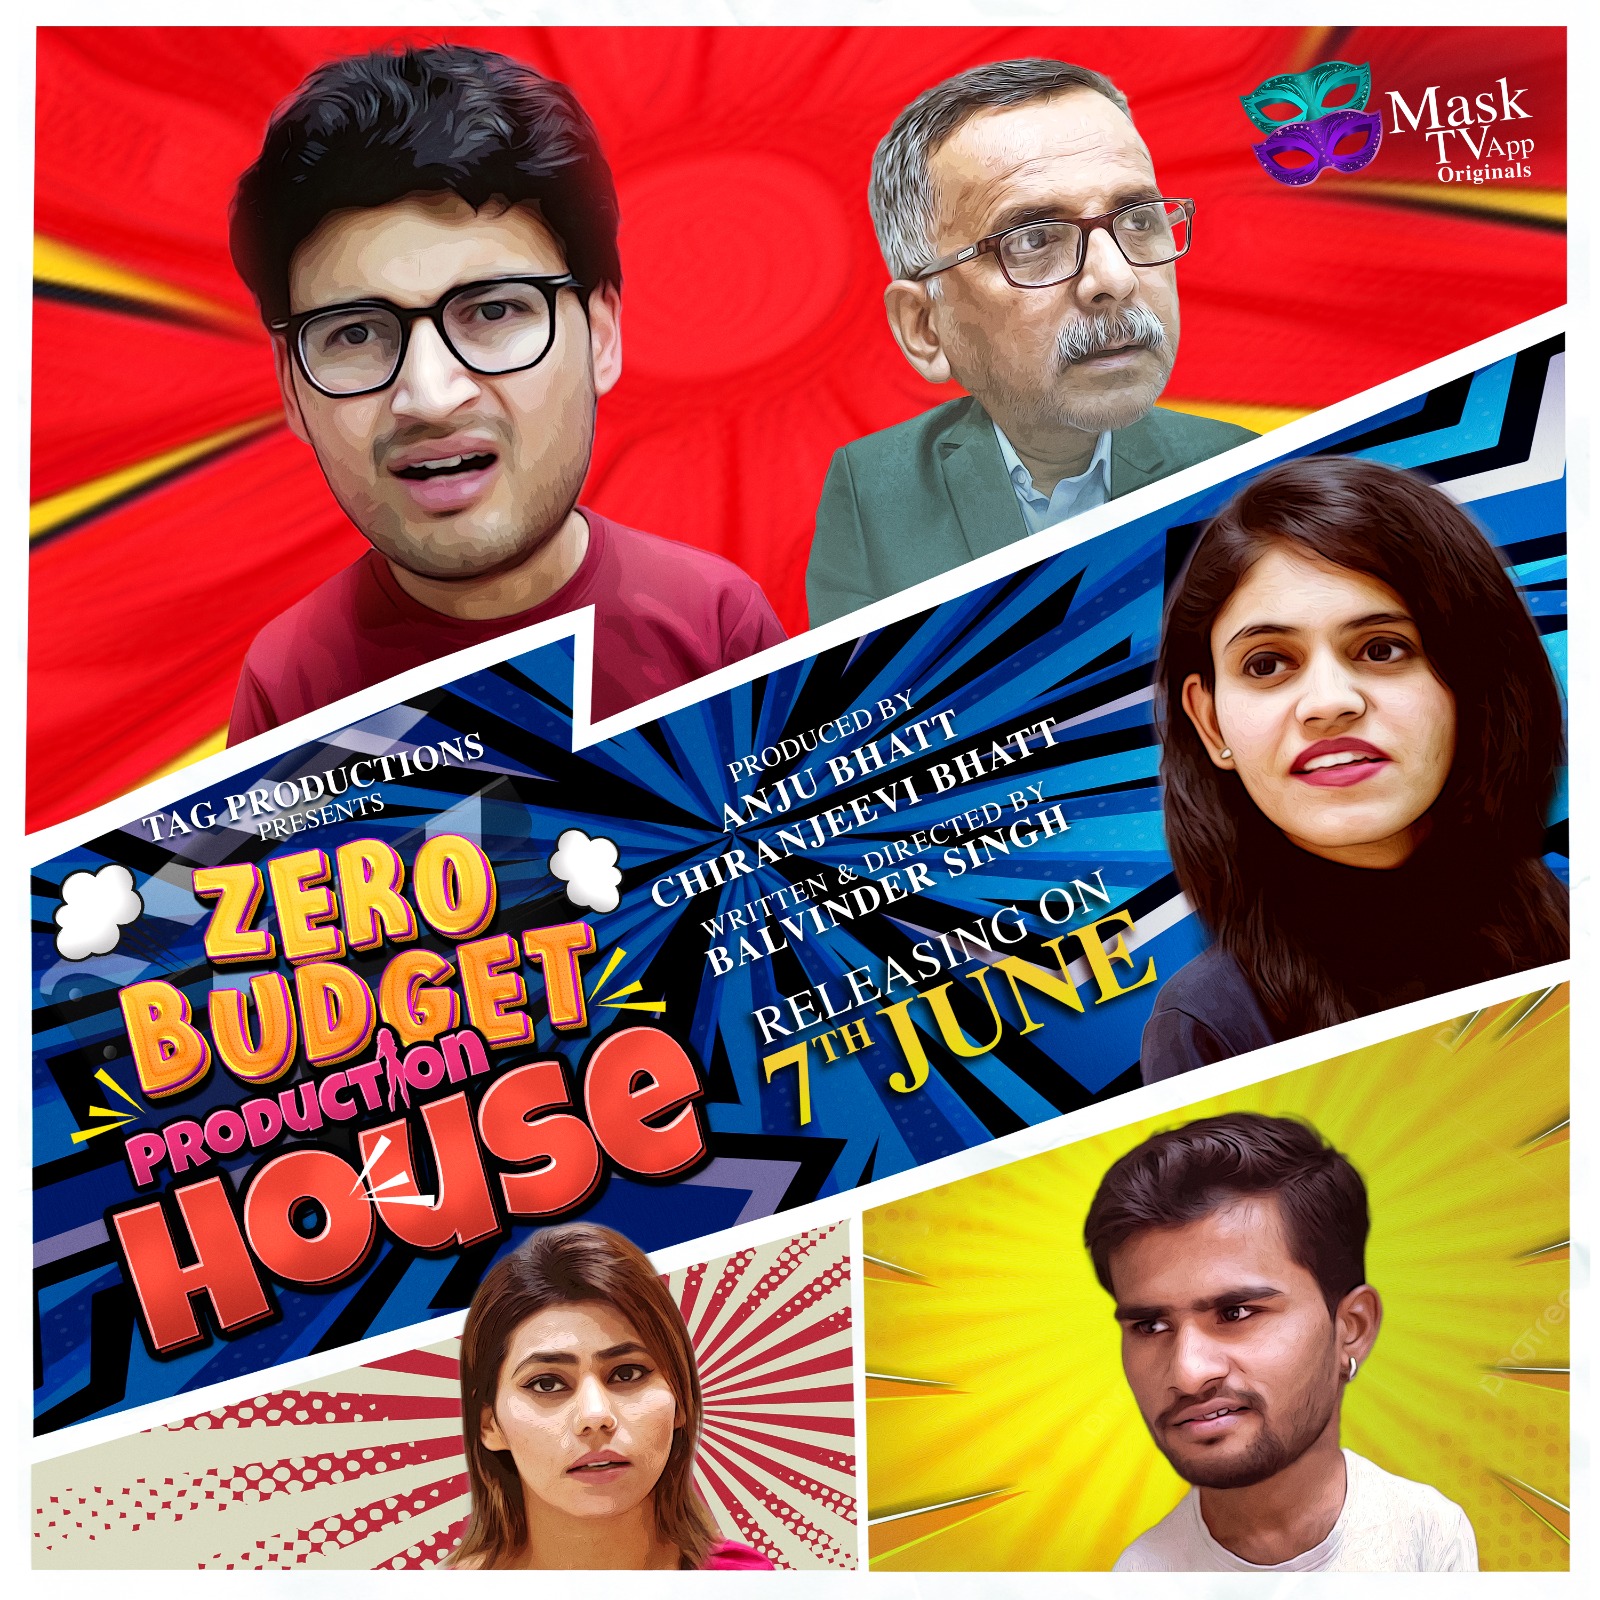 Zero Budget Production House" Becomes an Instant Hit on Mask TV